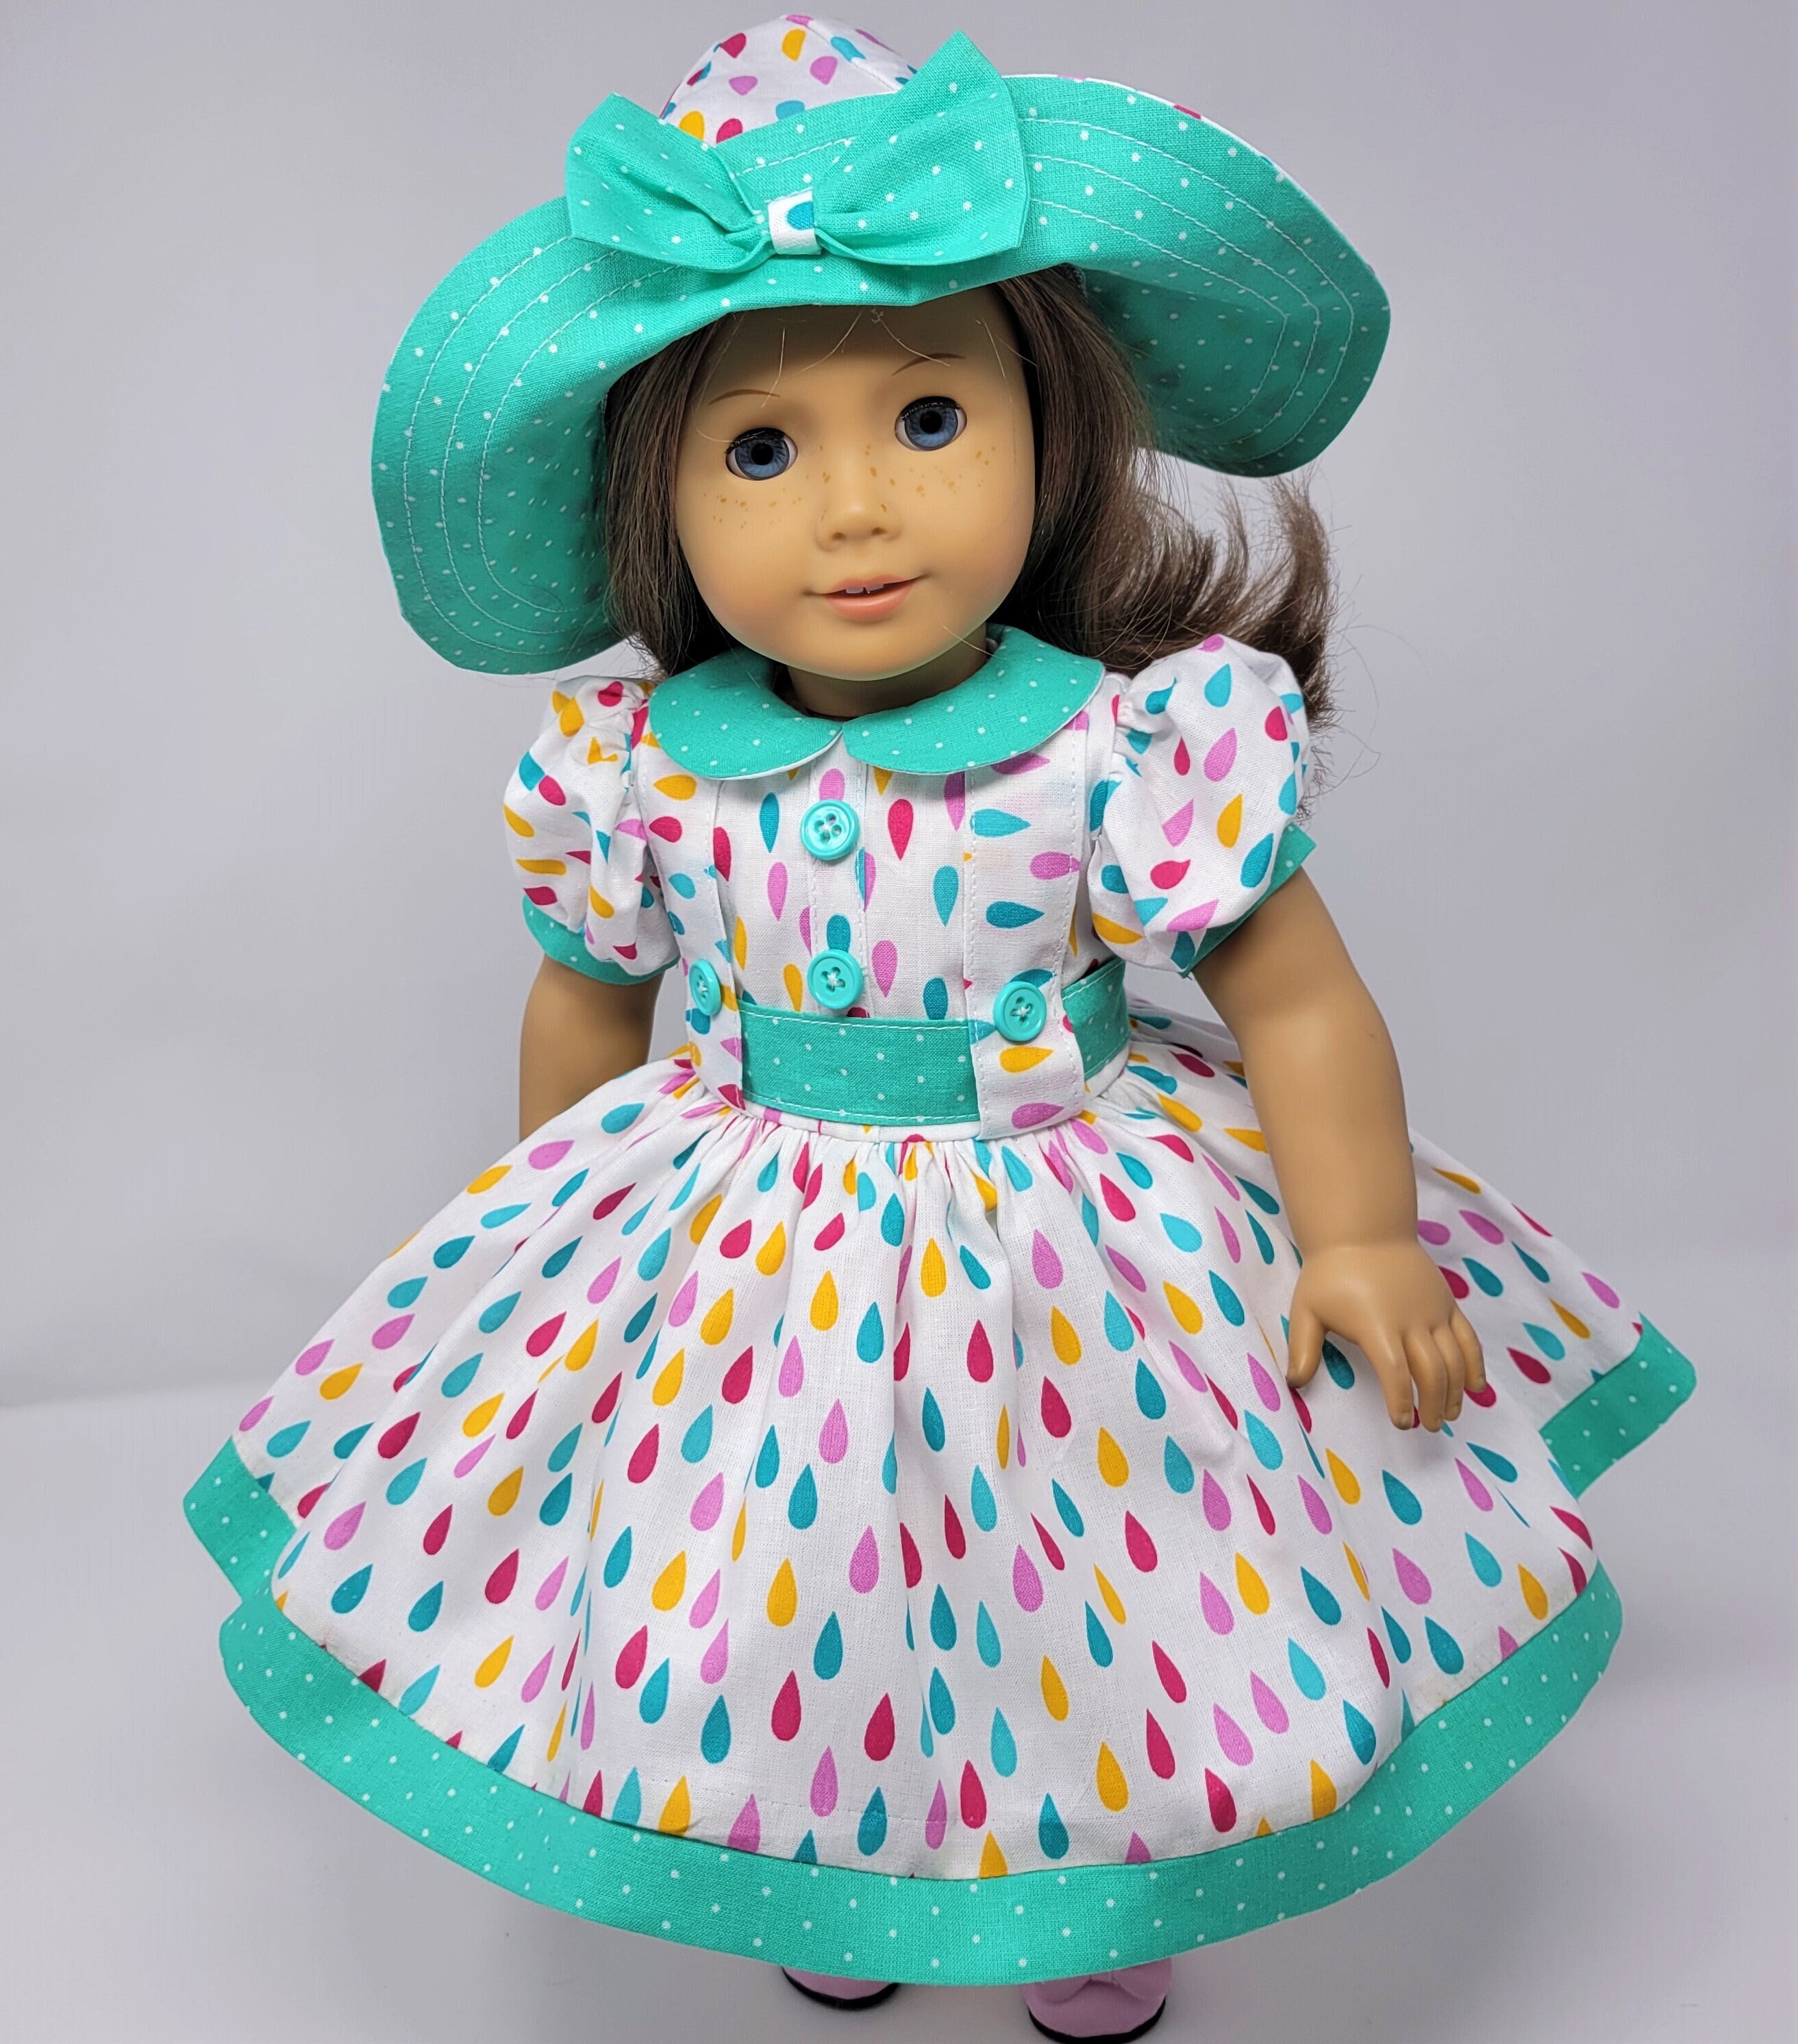 April Showers is a Handmade Dress for an 18 Inch Doll Such as - Etsy